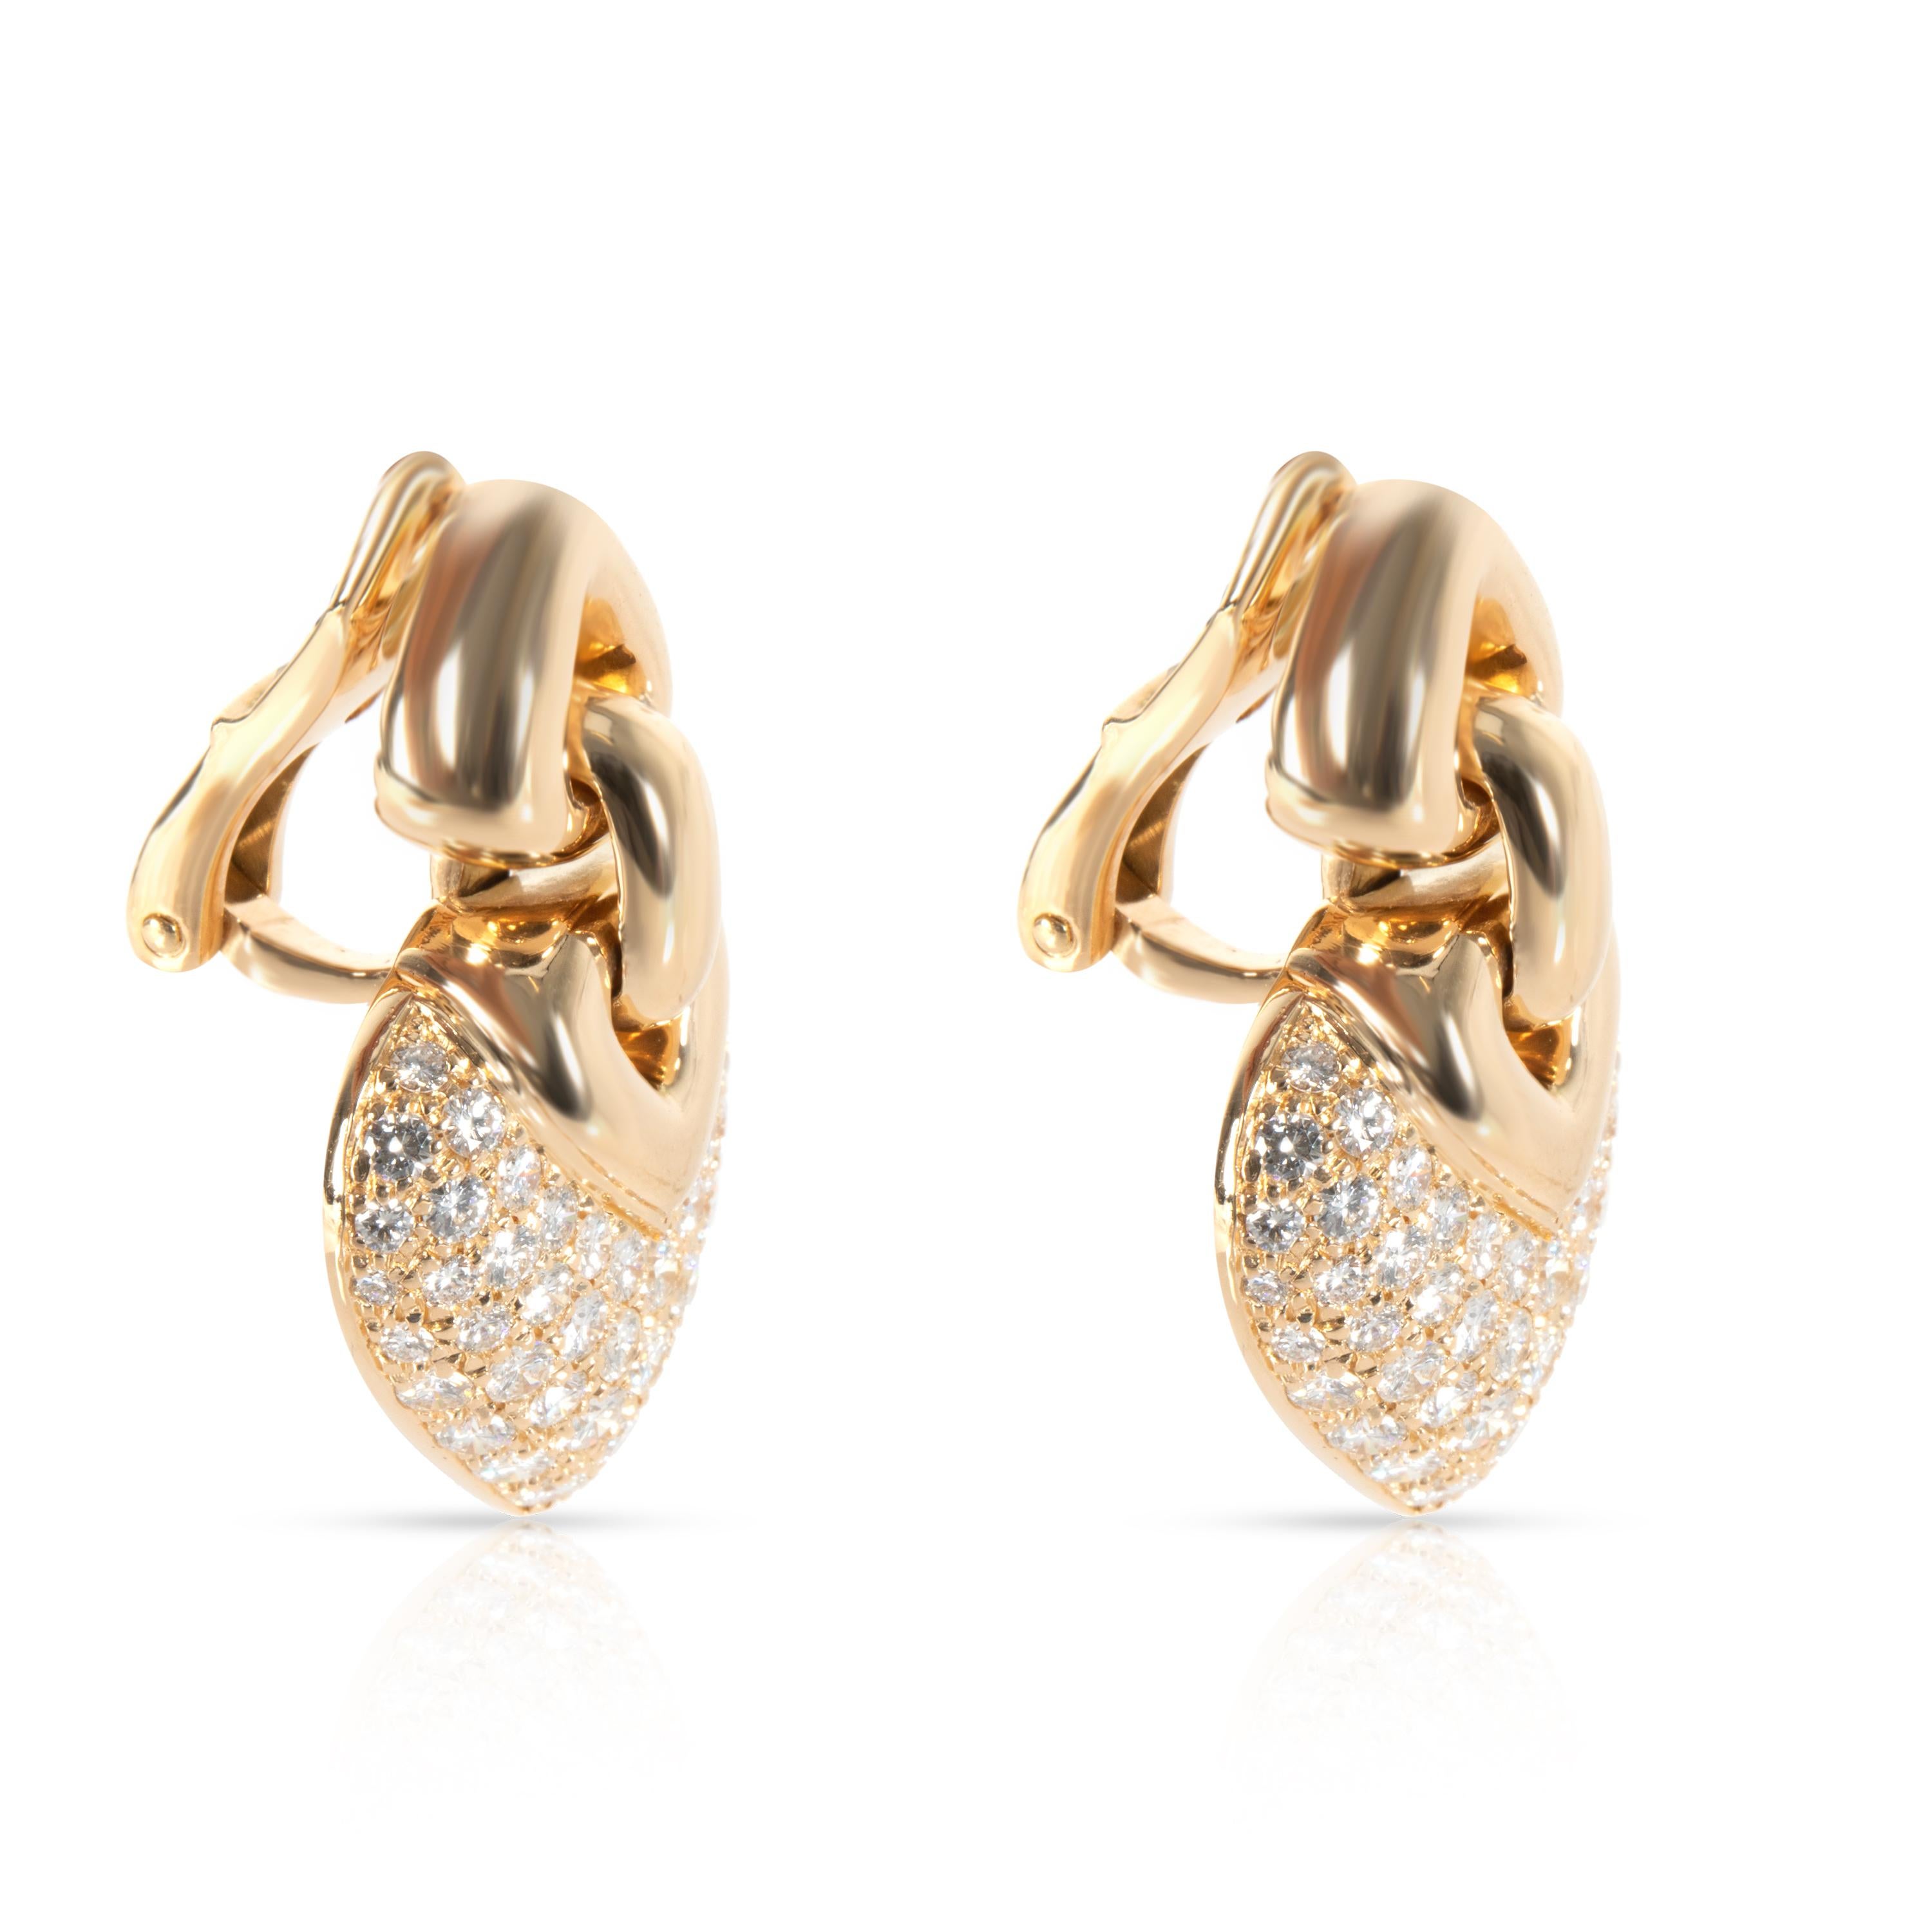 
Bulgari Doppio Cuore Diamond Earrings in 18K Yellow Gold 3 CTW

PRIMARY DETAILS

SKU: 105169

Condition Description: Retails for 20,000 USD. In excellent condition and recently polished.

Brand: Bulgari
Collection/Series: Doppio Cuore
Metal Type: